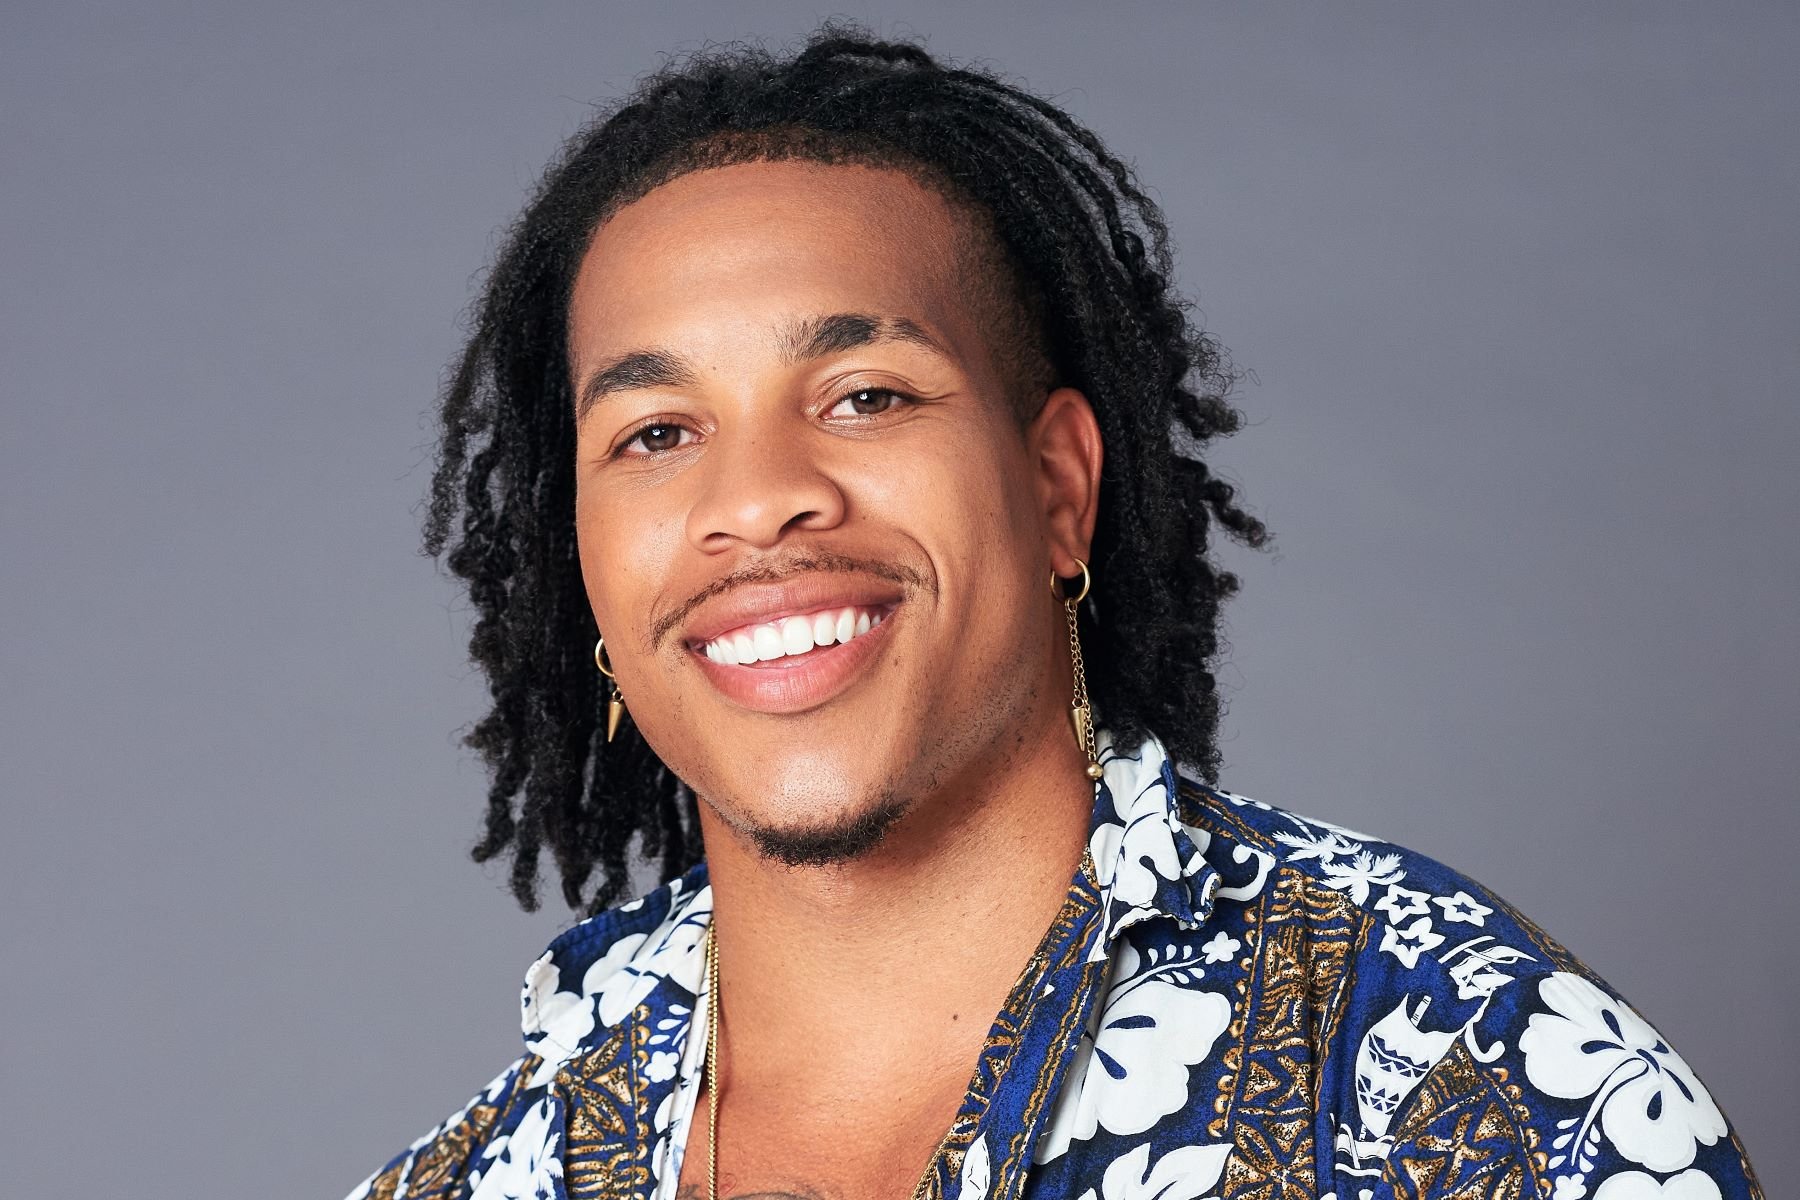 Aqel Carson, who stars in 'Are You the One?' Season 9, wears a blue and white Hawaiian shirt.